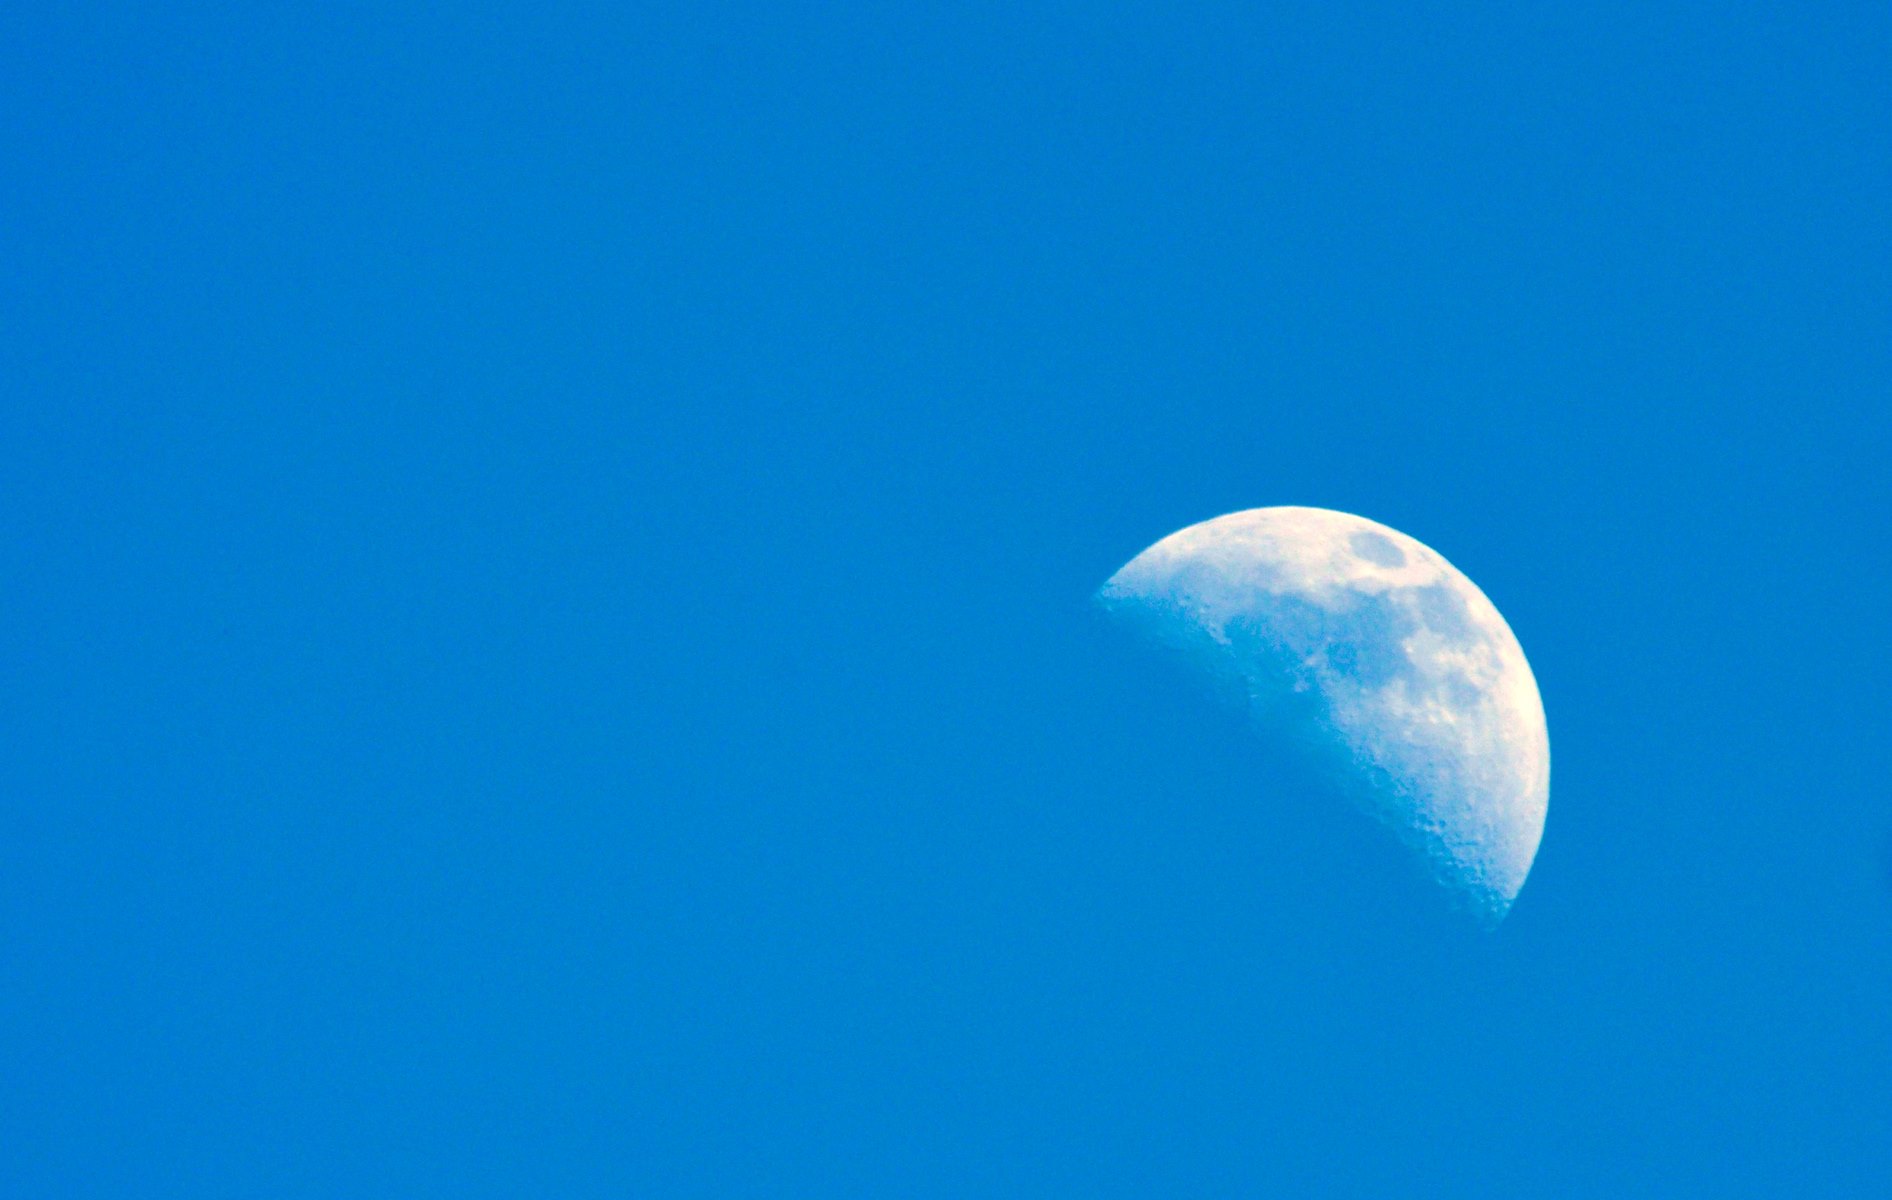 moon by day...